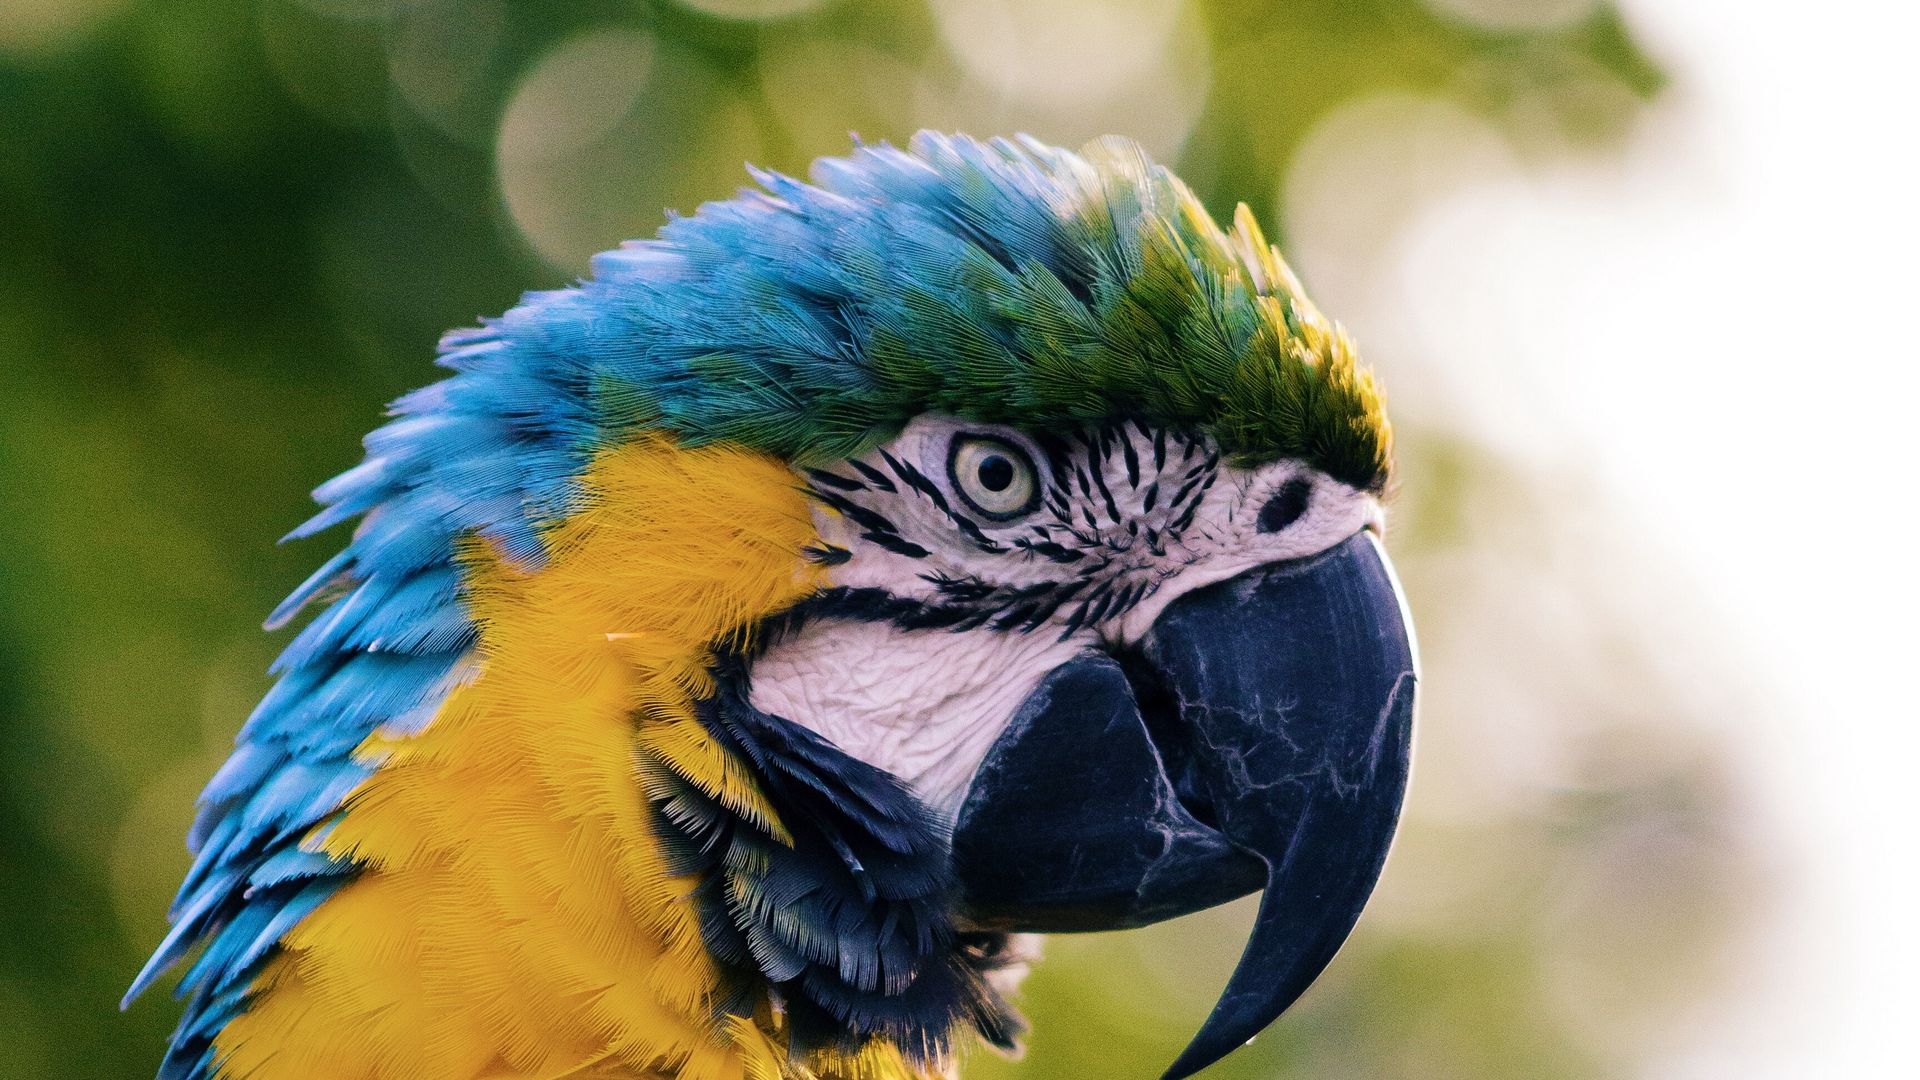 Download wallpaper 1920x1080 macaw, parrot, bird, color full hd, hdtv, fhd, 1080p  hd background